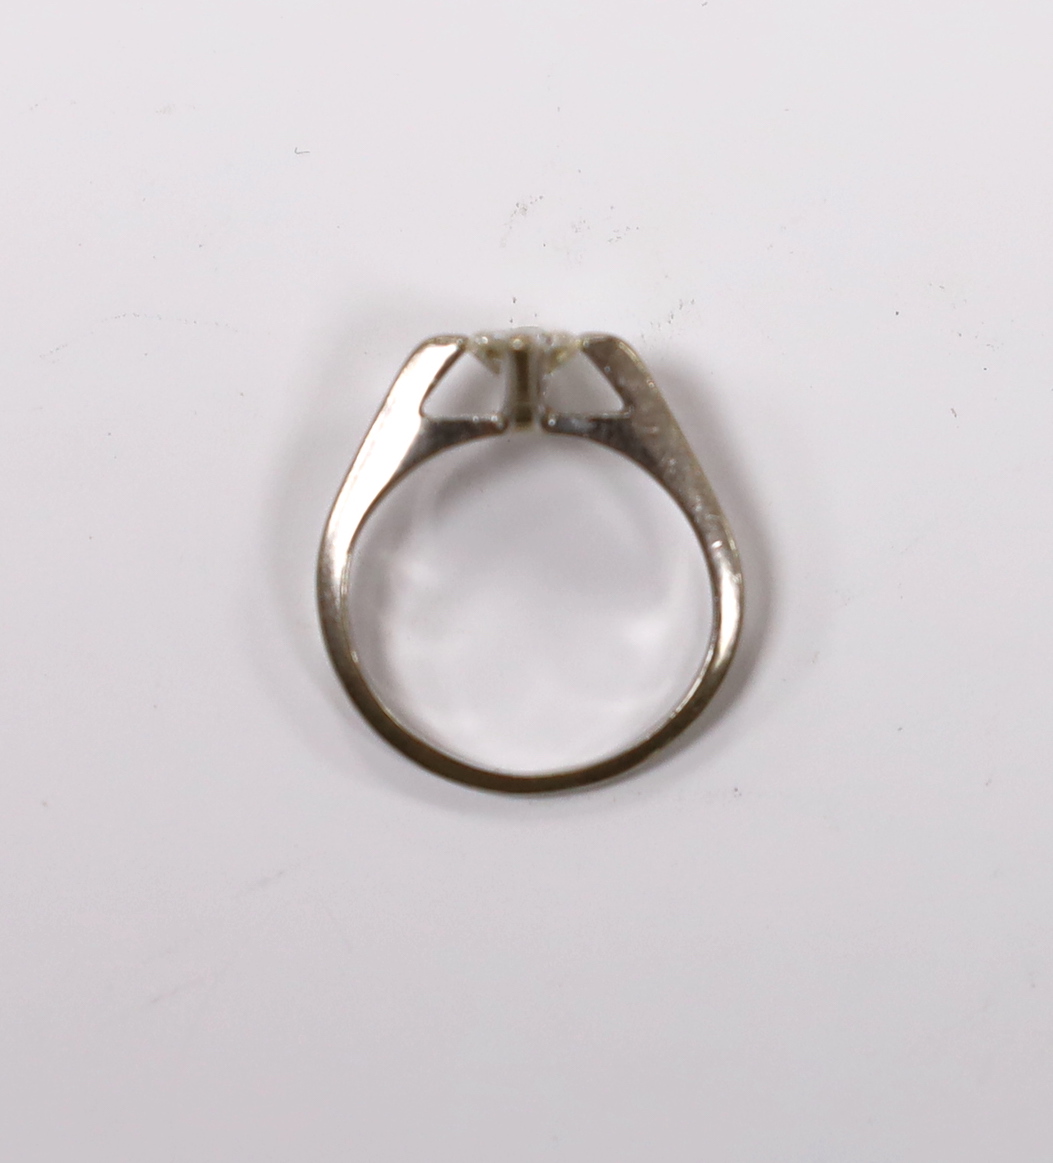 A modern white metal and solitaire diamond set ring, size K, gross weight 3.5 grams.